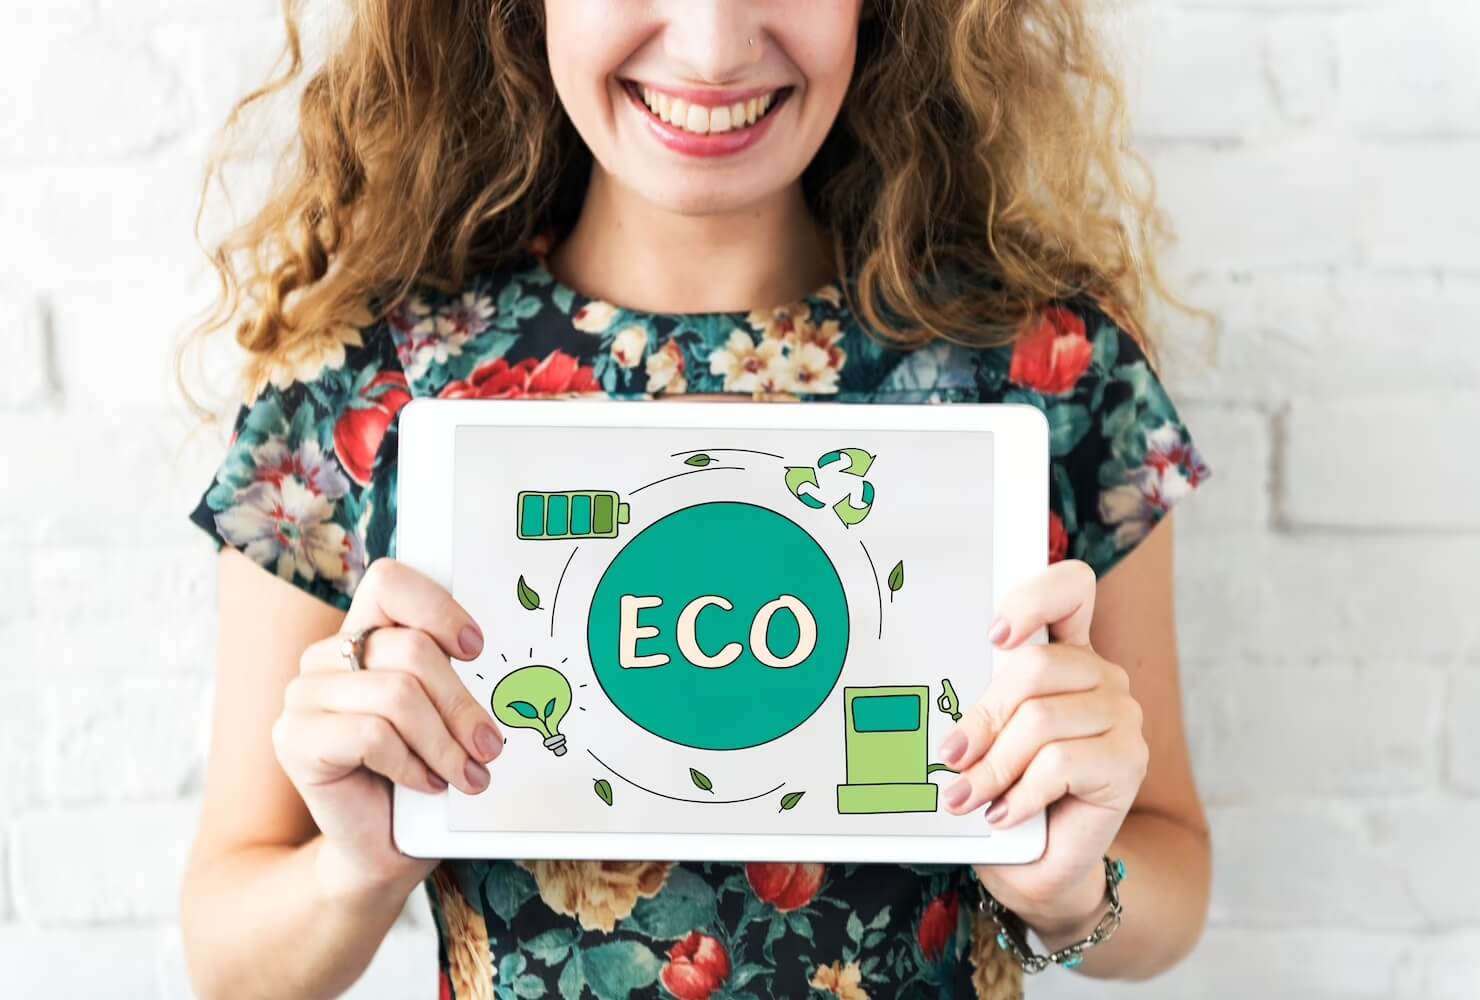 Embracing Sustainability: A Guide to Eco-Friendly Back to School